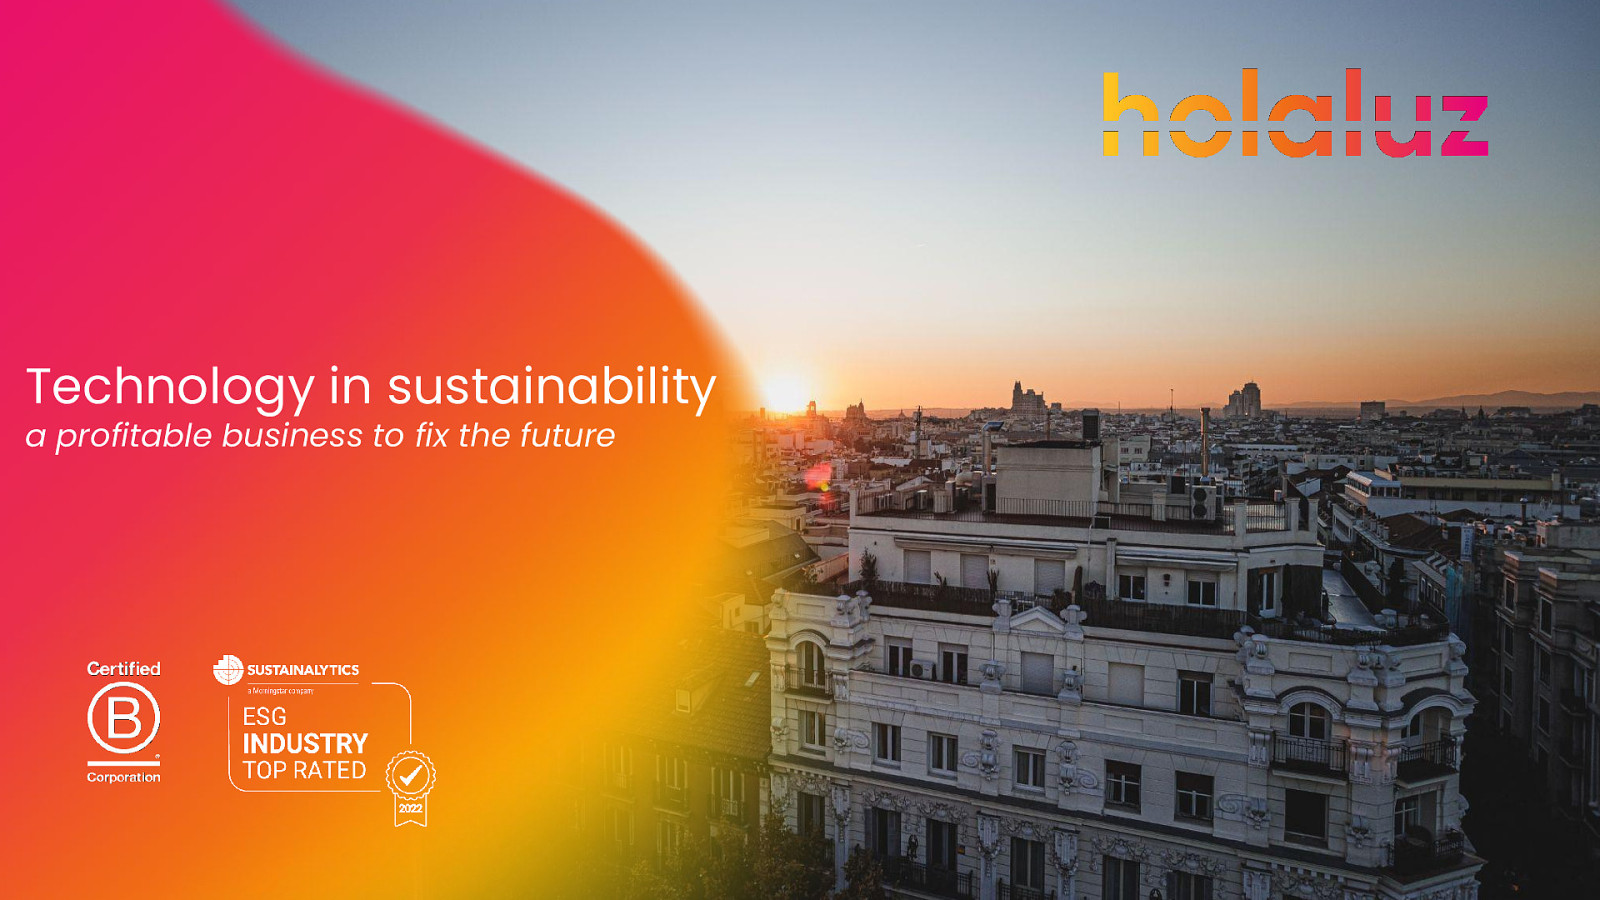 Technology in sustainability: A profitable business to fix the future